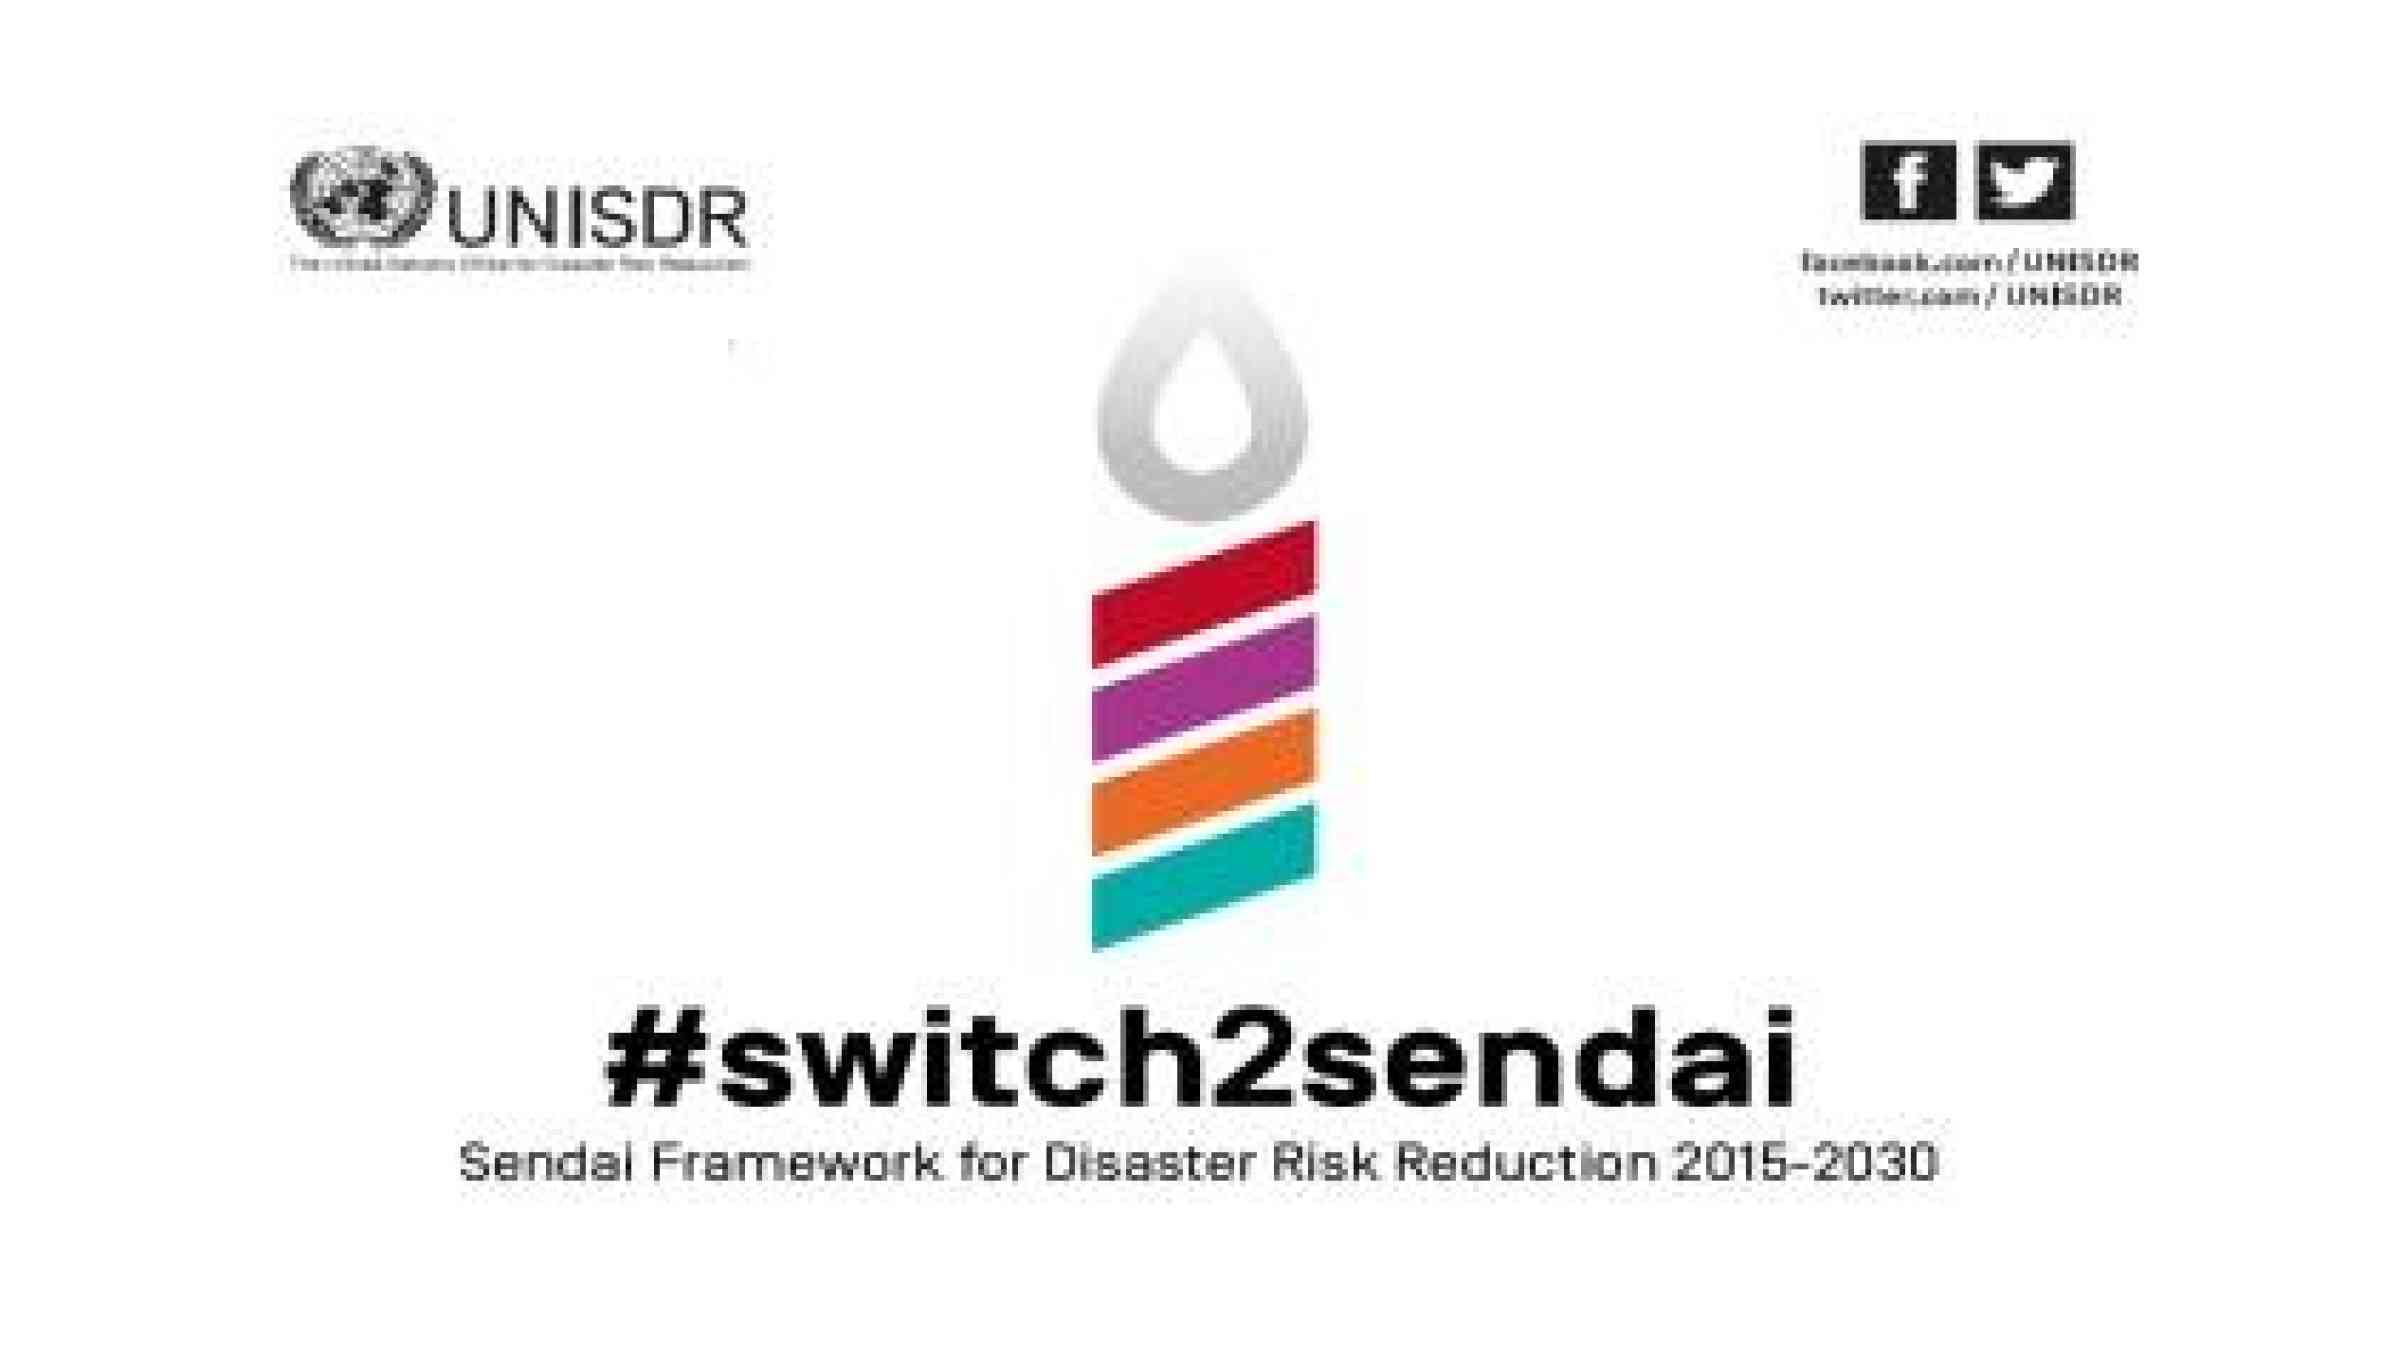 The one-year-old Sendai Framework is the most comprehensive global disaster risk reduction to date (Photo: UNISDR)